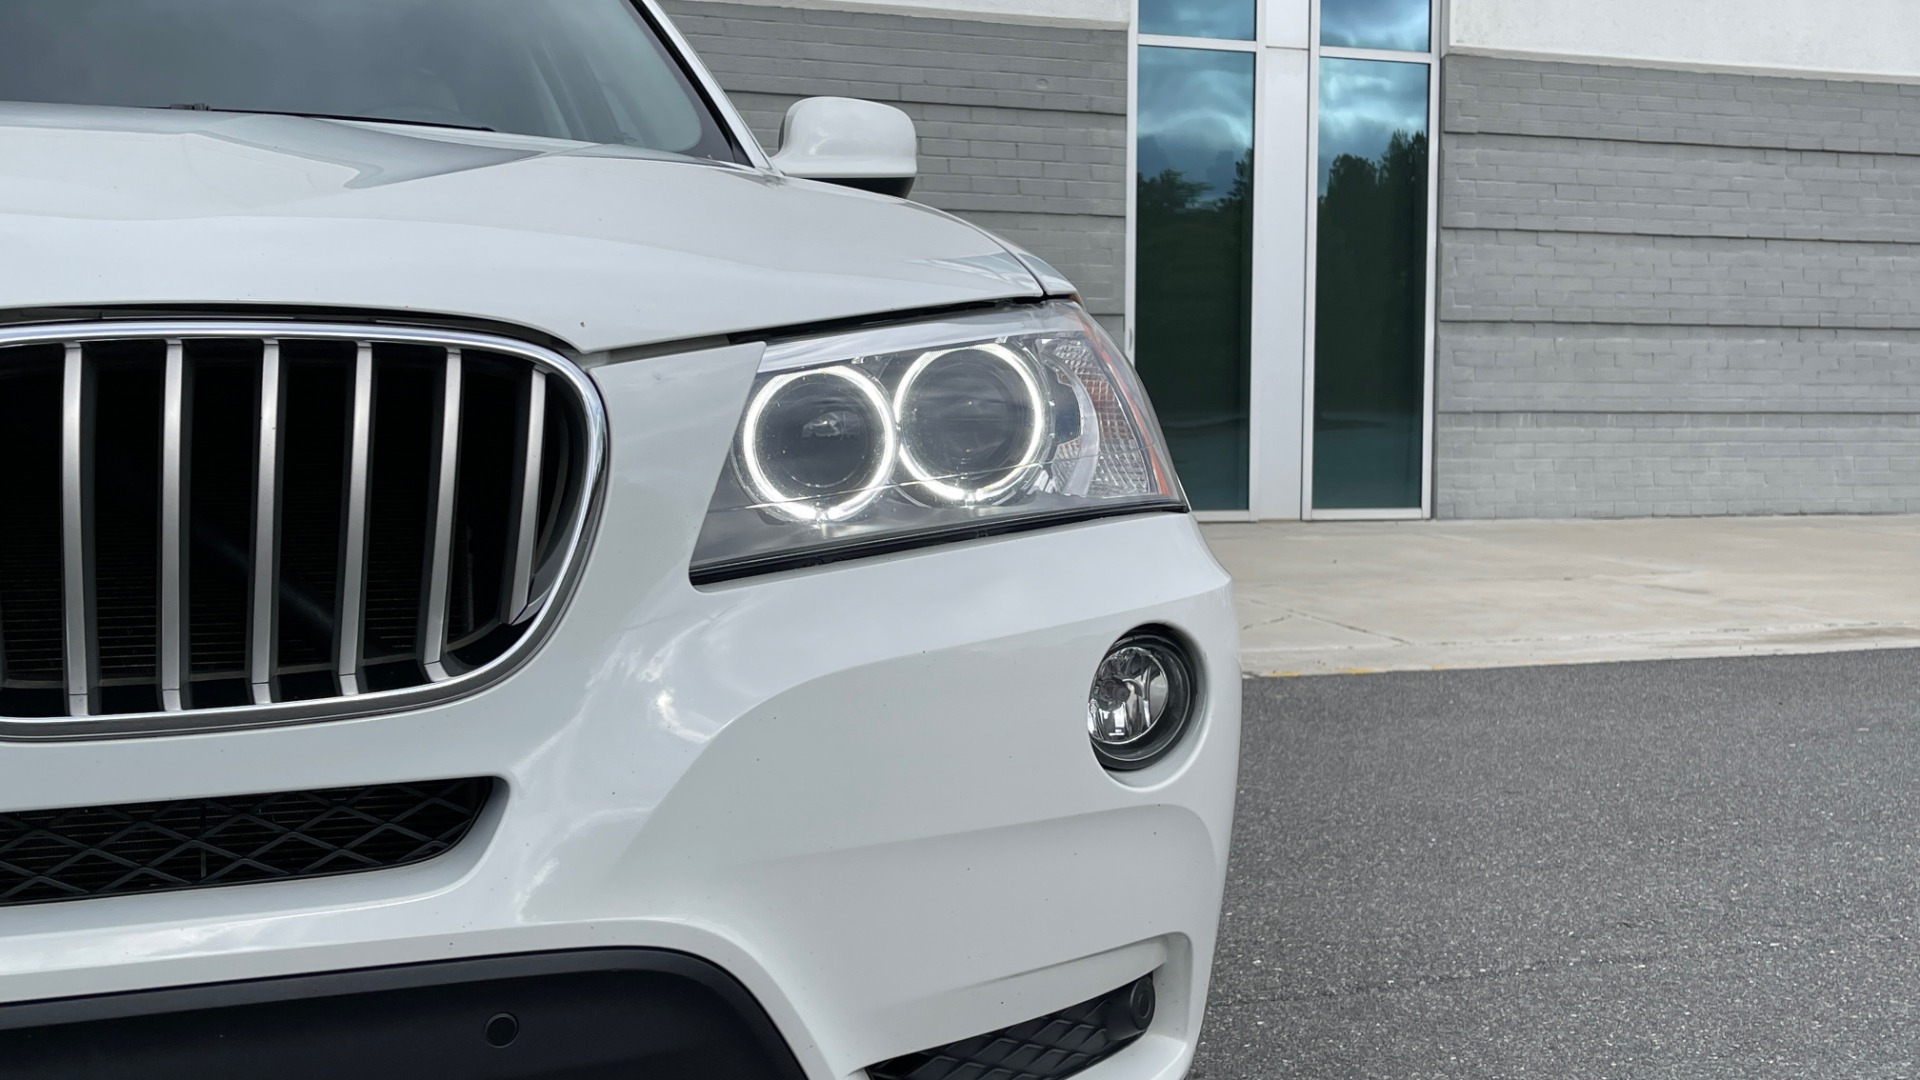 Used 2013 BMW X3 XDRIVE35I PREMIUM / TECHNOLOGY / COLD WTHR / REARVIEW for sale Sold at Formula Imports in Charlotte NC 28227 12